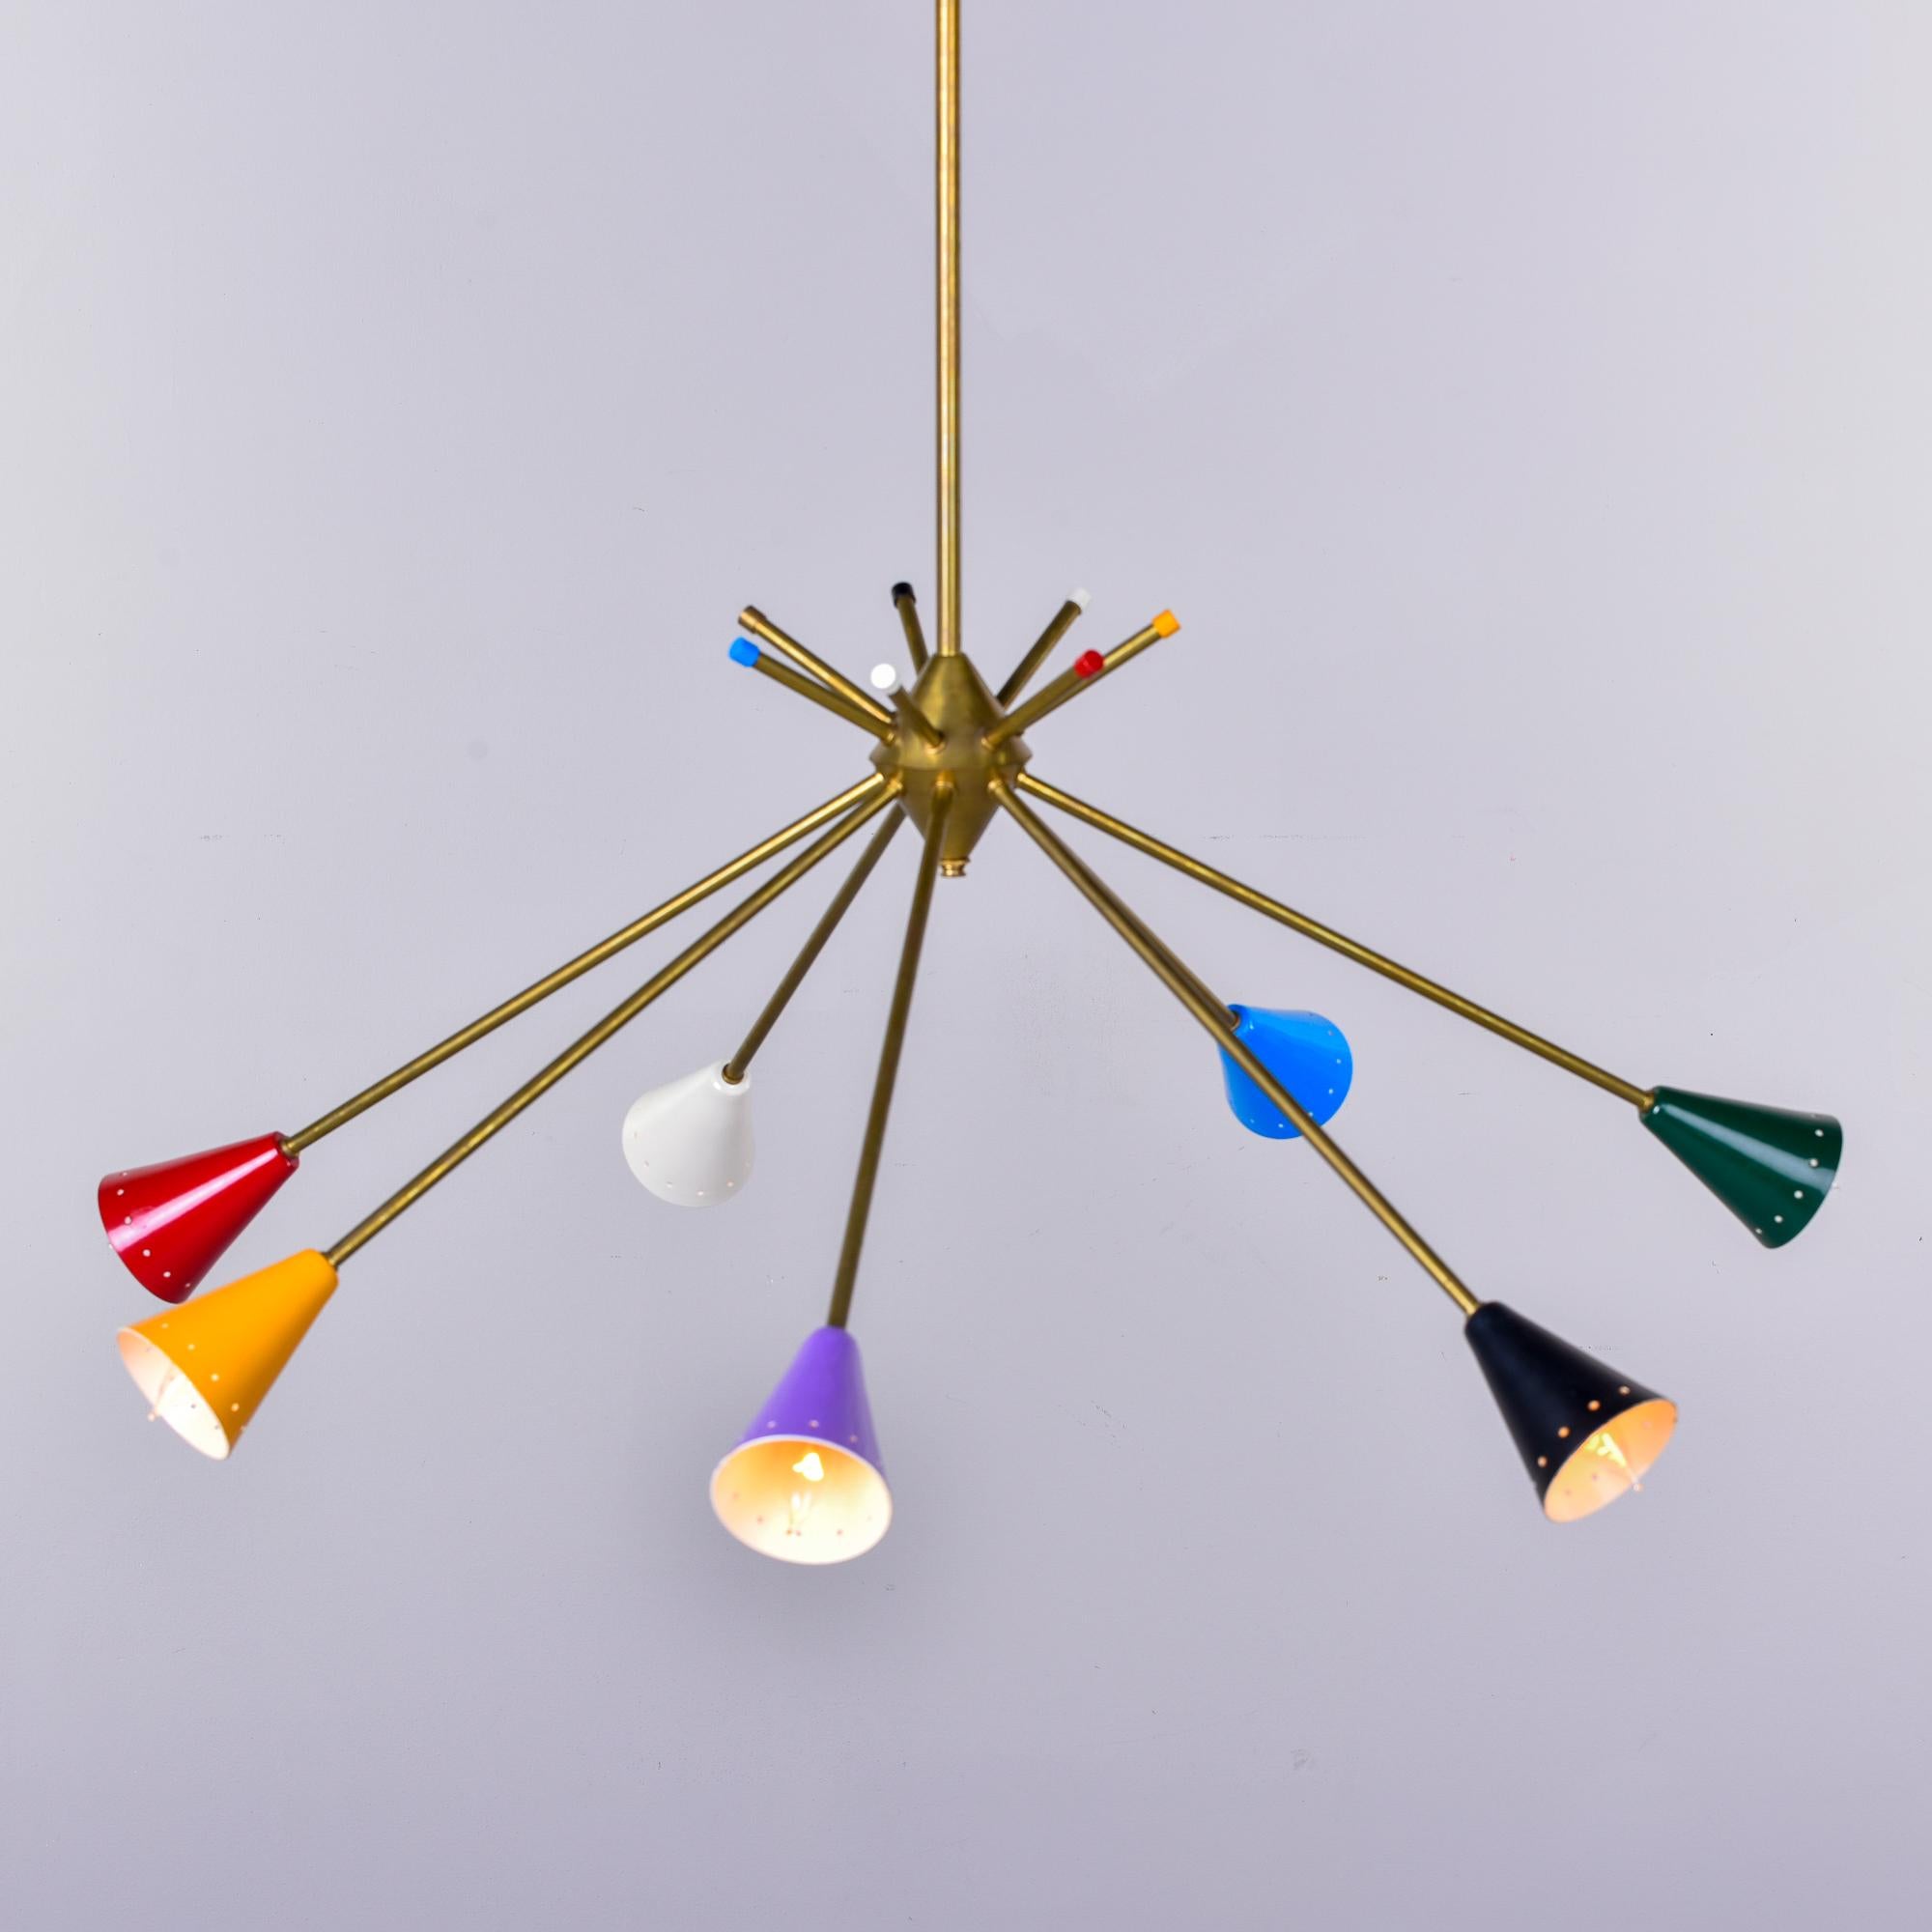 Found in Italy, this circa 1960 light fixture is attributed to Stilnovo. This fixture has a slender brass frame and support rod with seven arms ending in multi-colored metal shades. Wiring has been updated for US electrical standards.